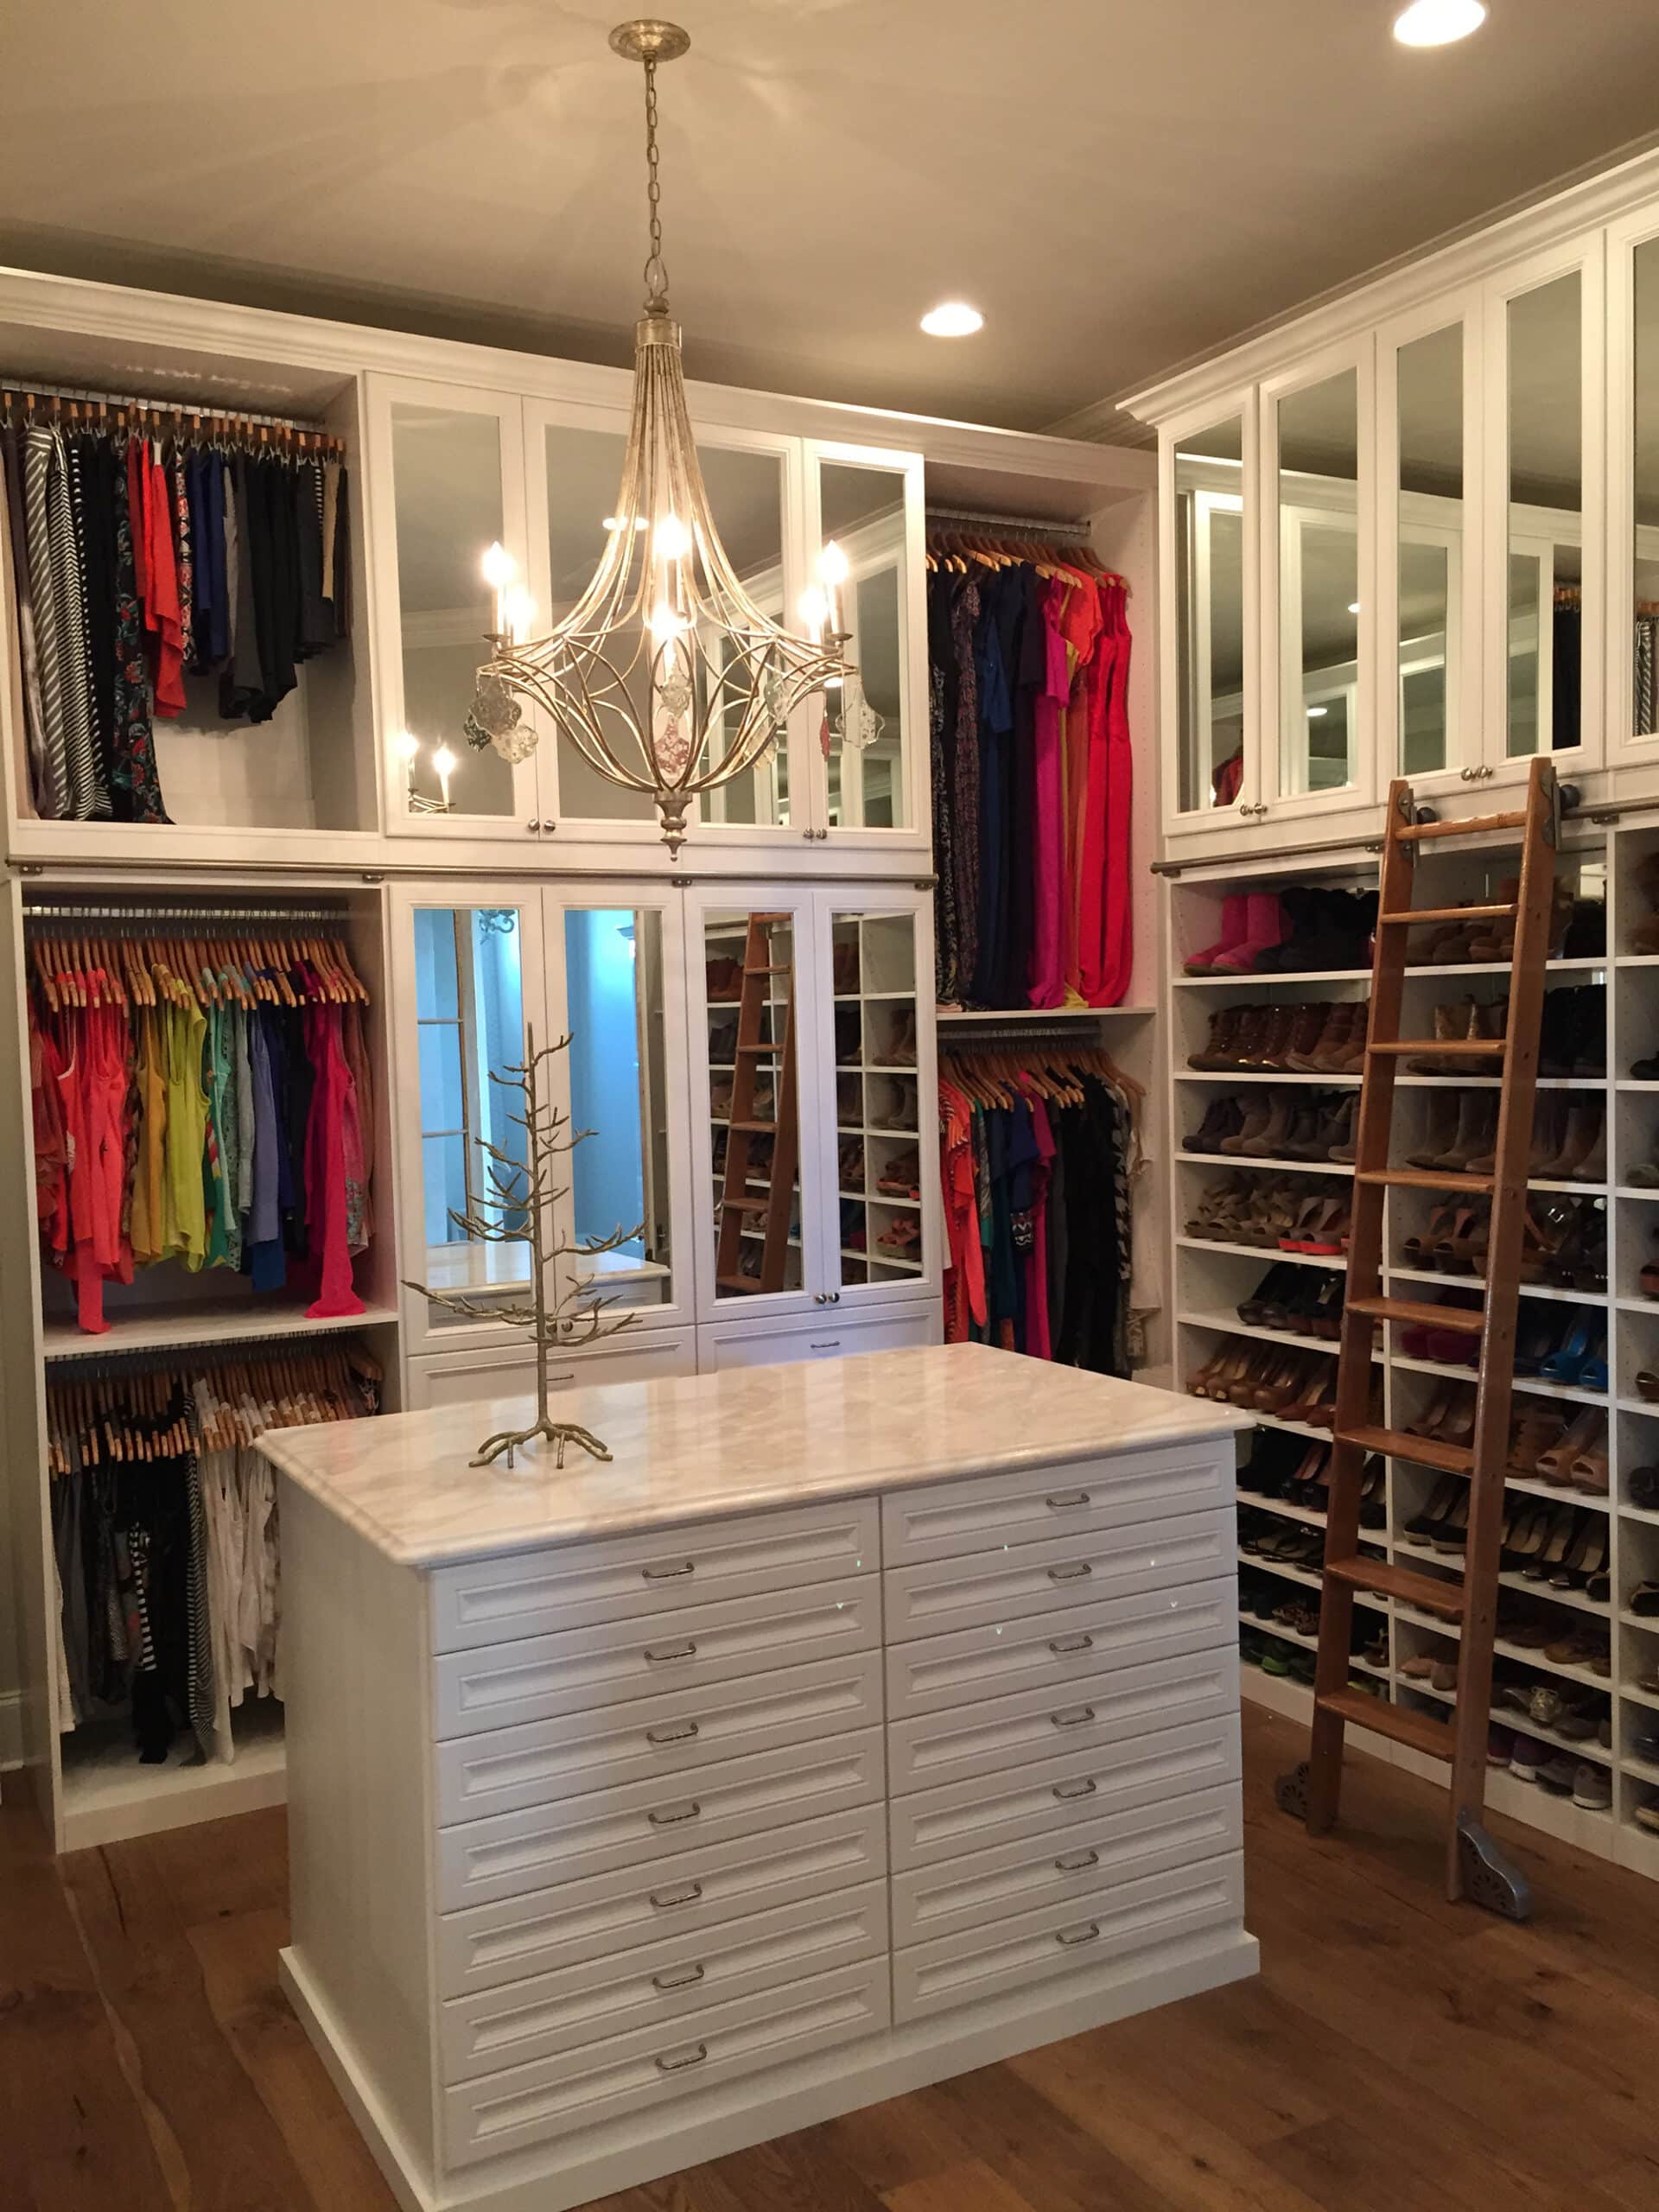 Walk-in closet with library ladder, white drawers, and shoe racks